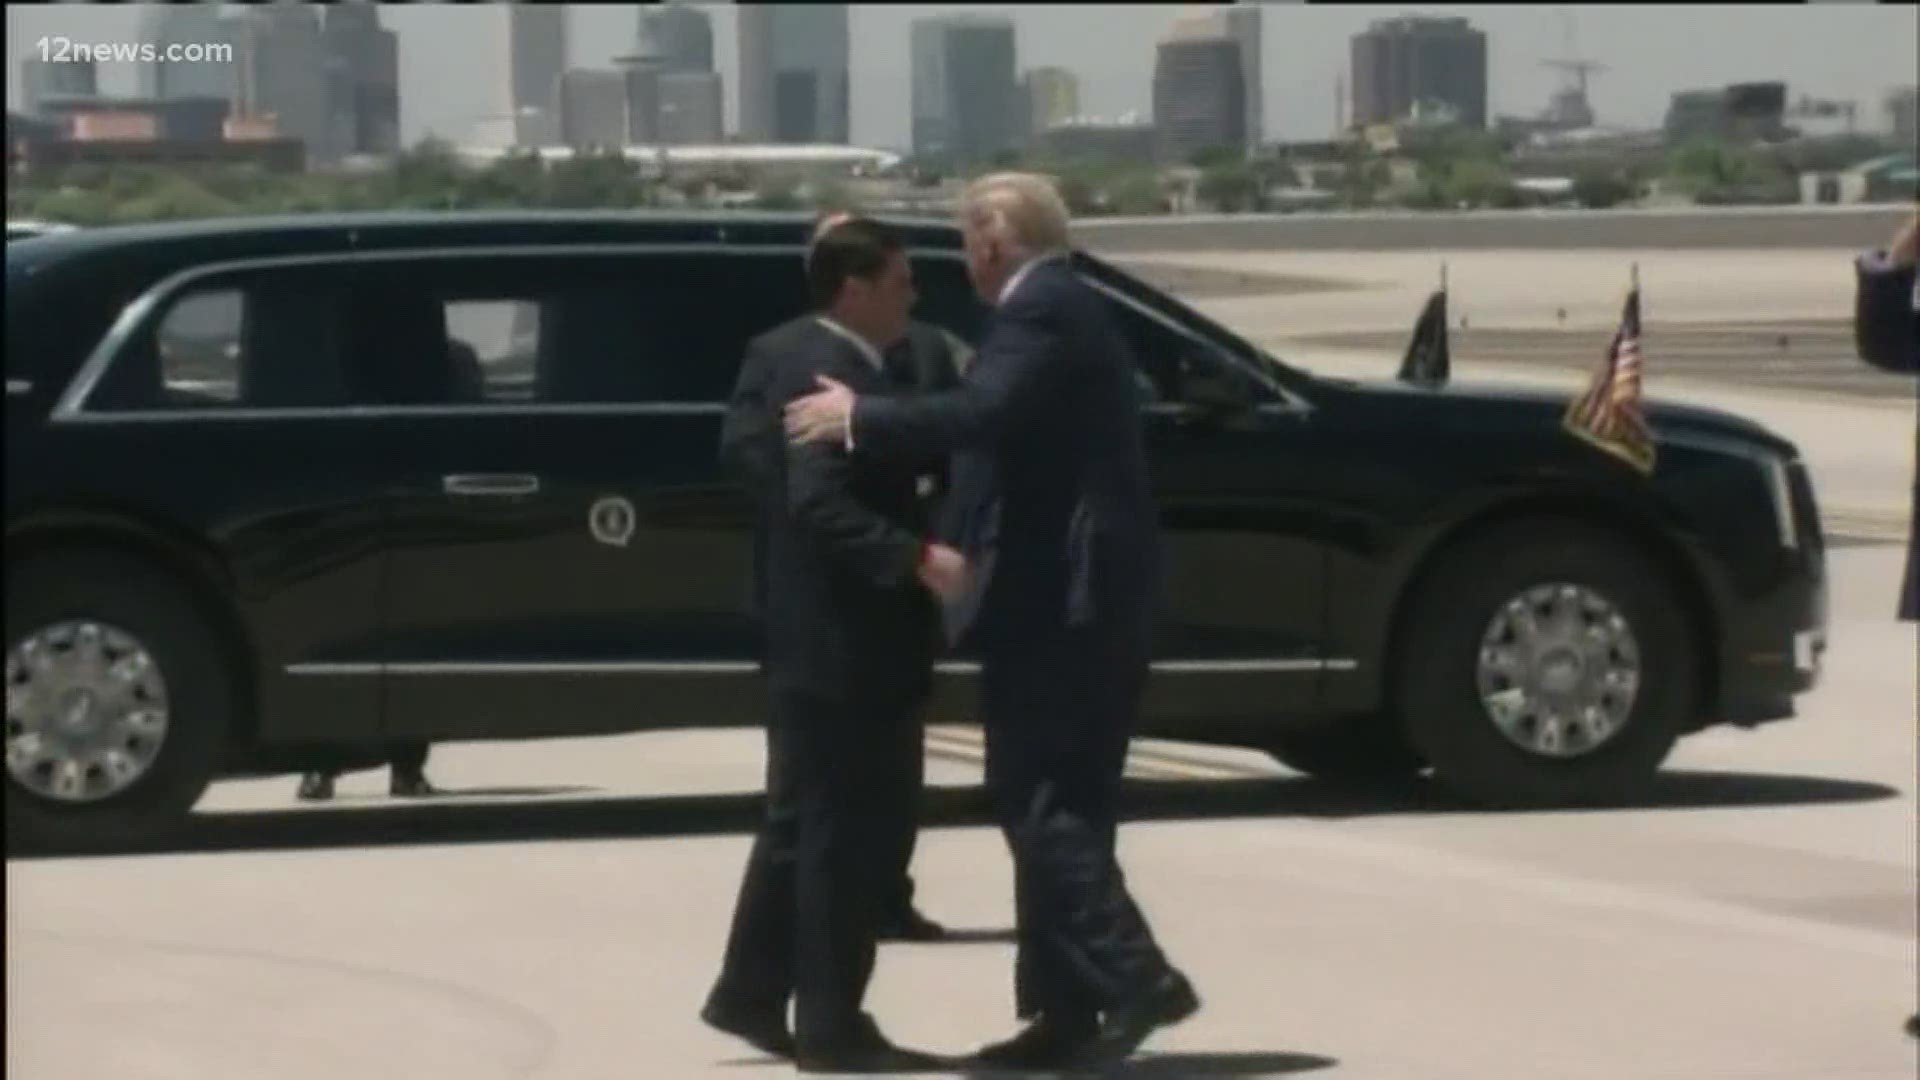 President Trump landed in Phoenix to tour a Honeywell plant that is making N-95 masks. The president was greeted by Gov. Ducey on the tarmac at Sky Harbor Airport.